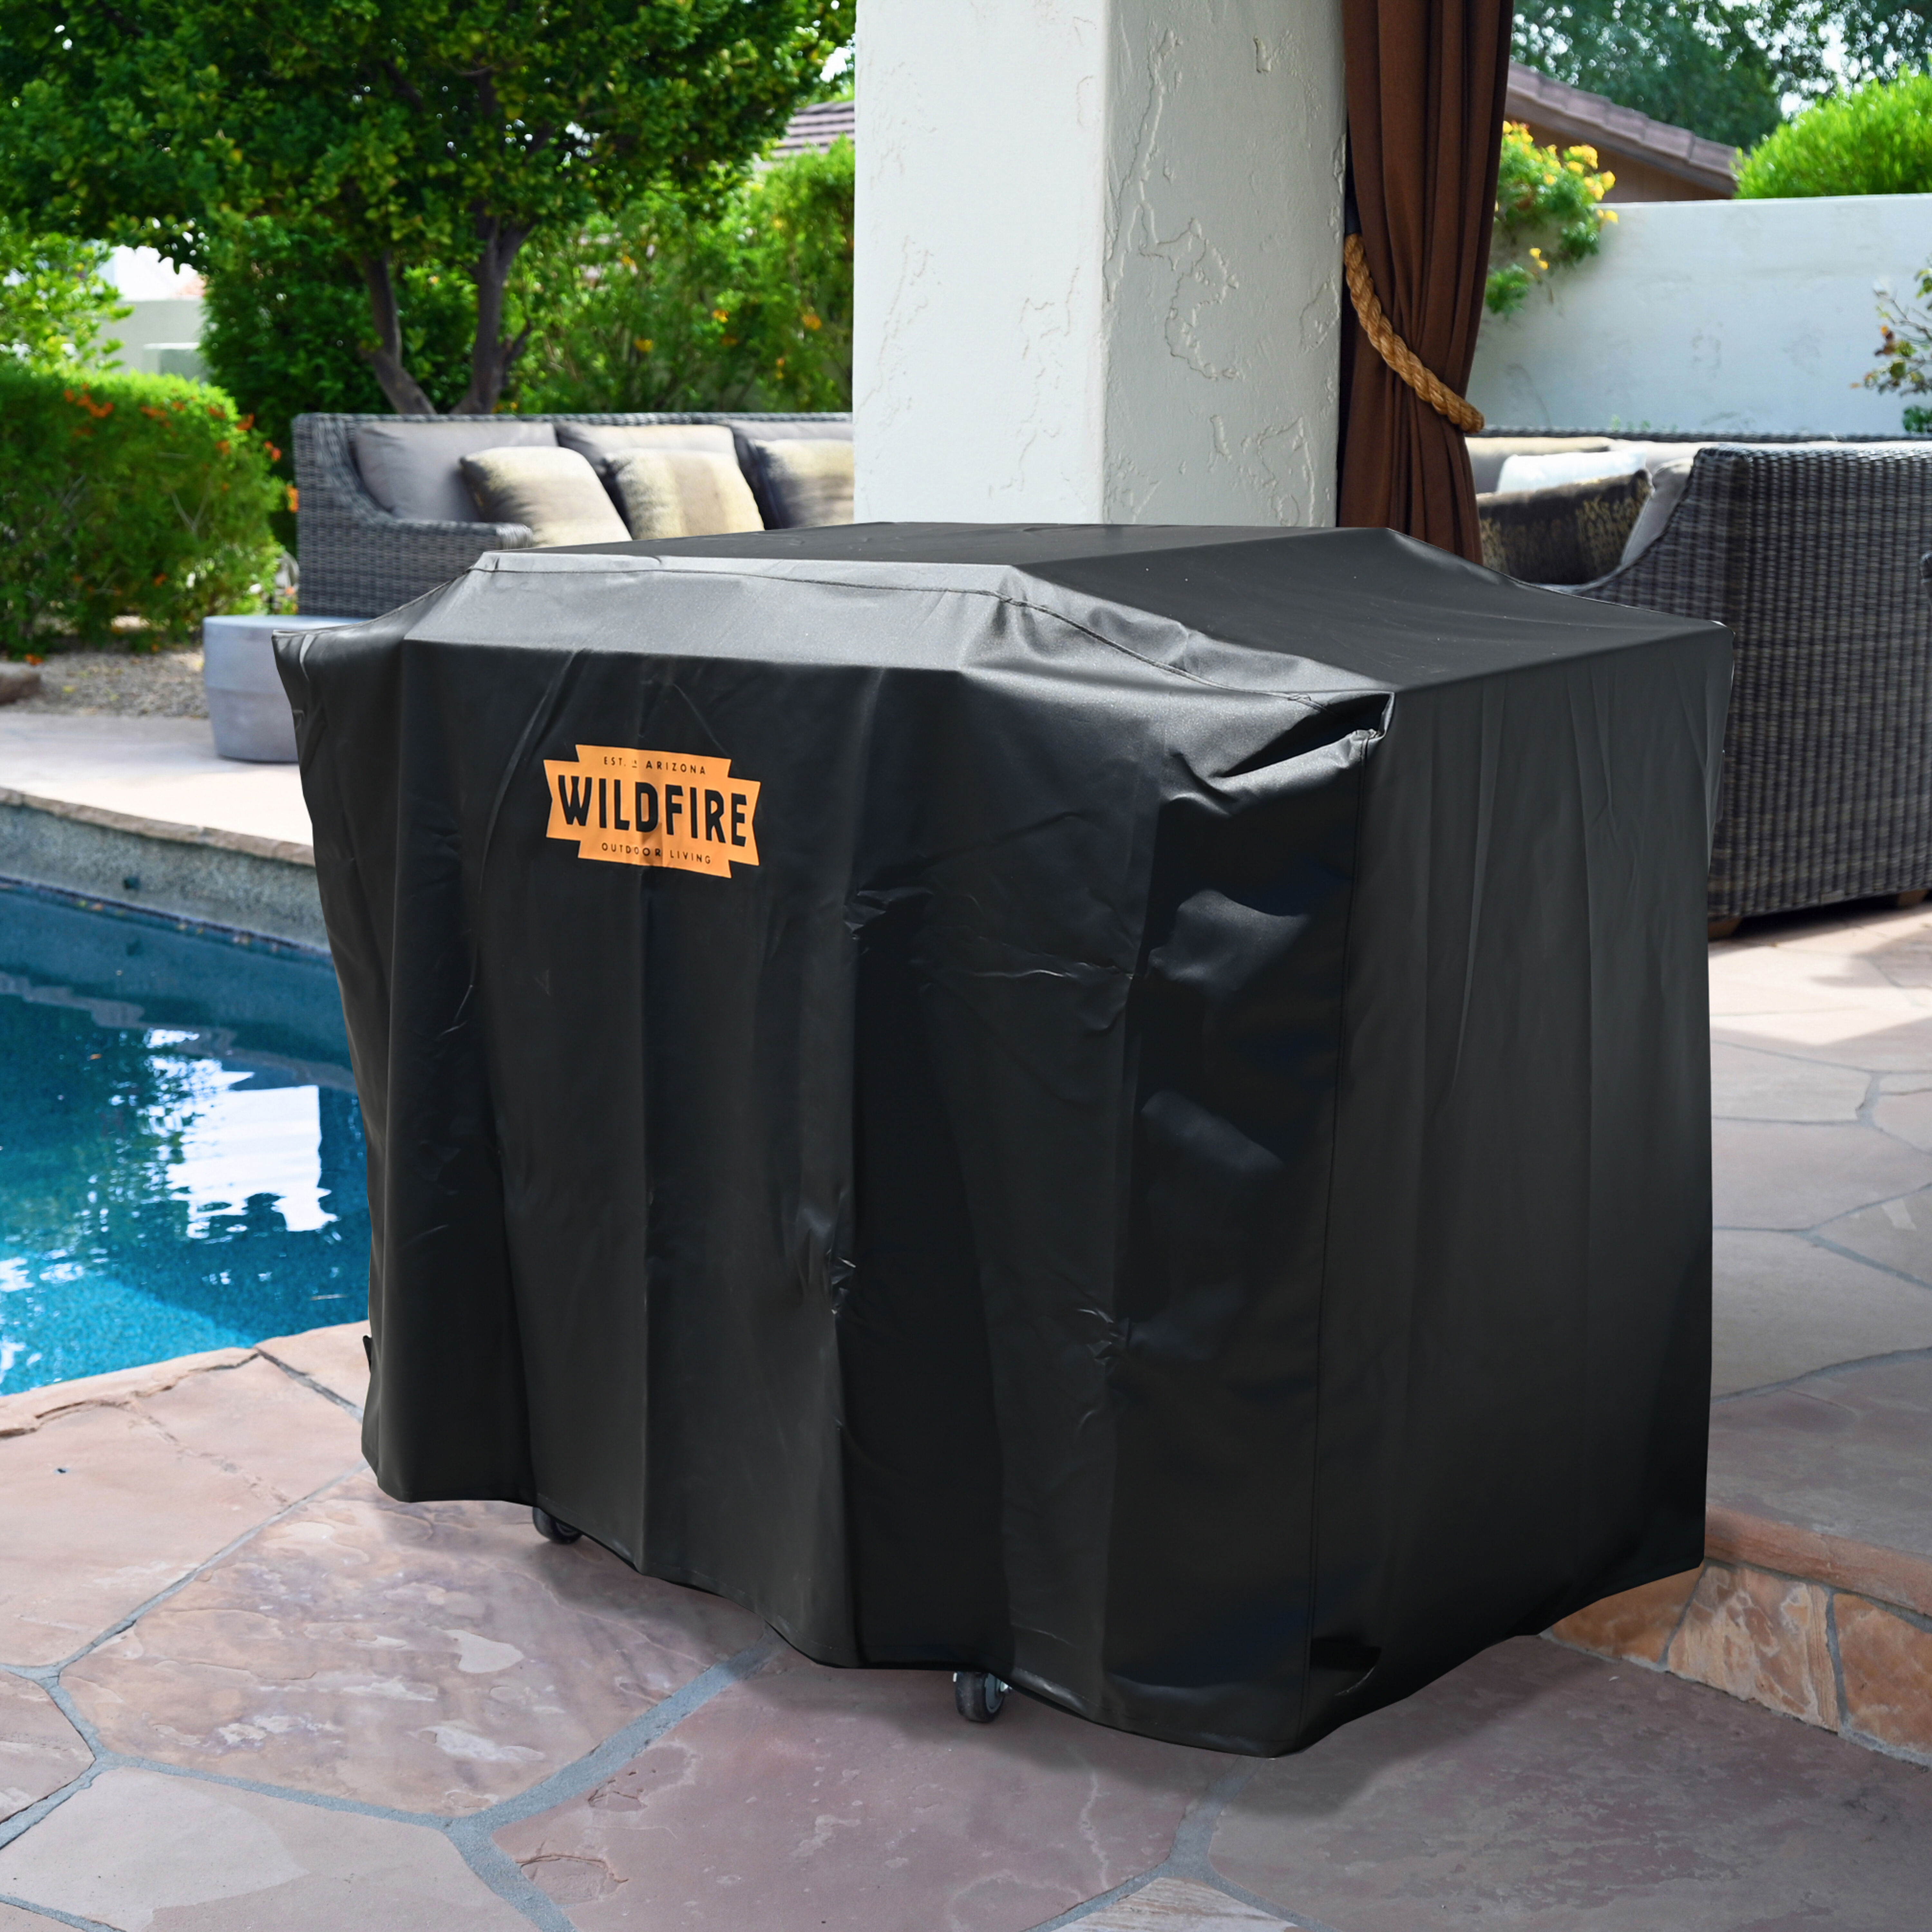 Purchase a fitted, weatherproof cover for your grill to protect it from the elements when you aren't using it.